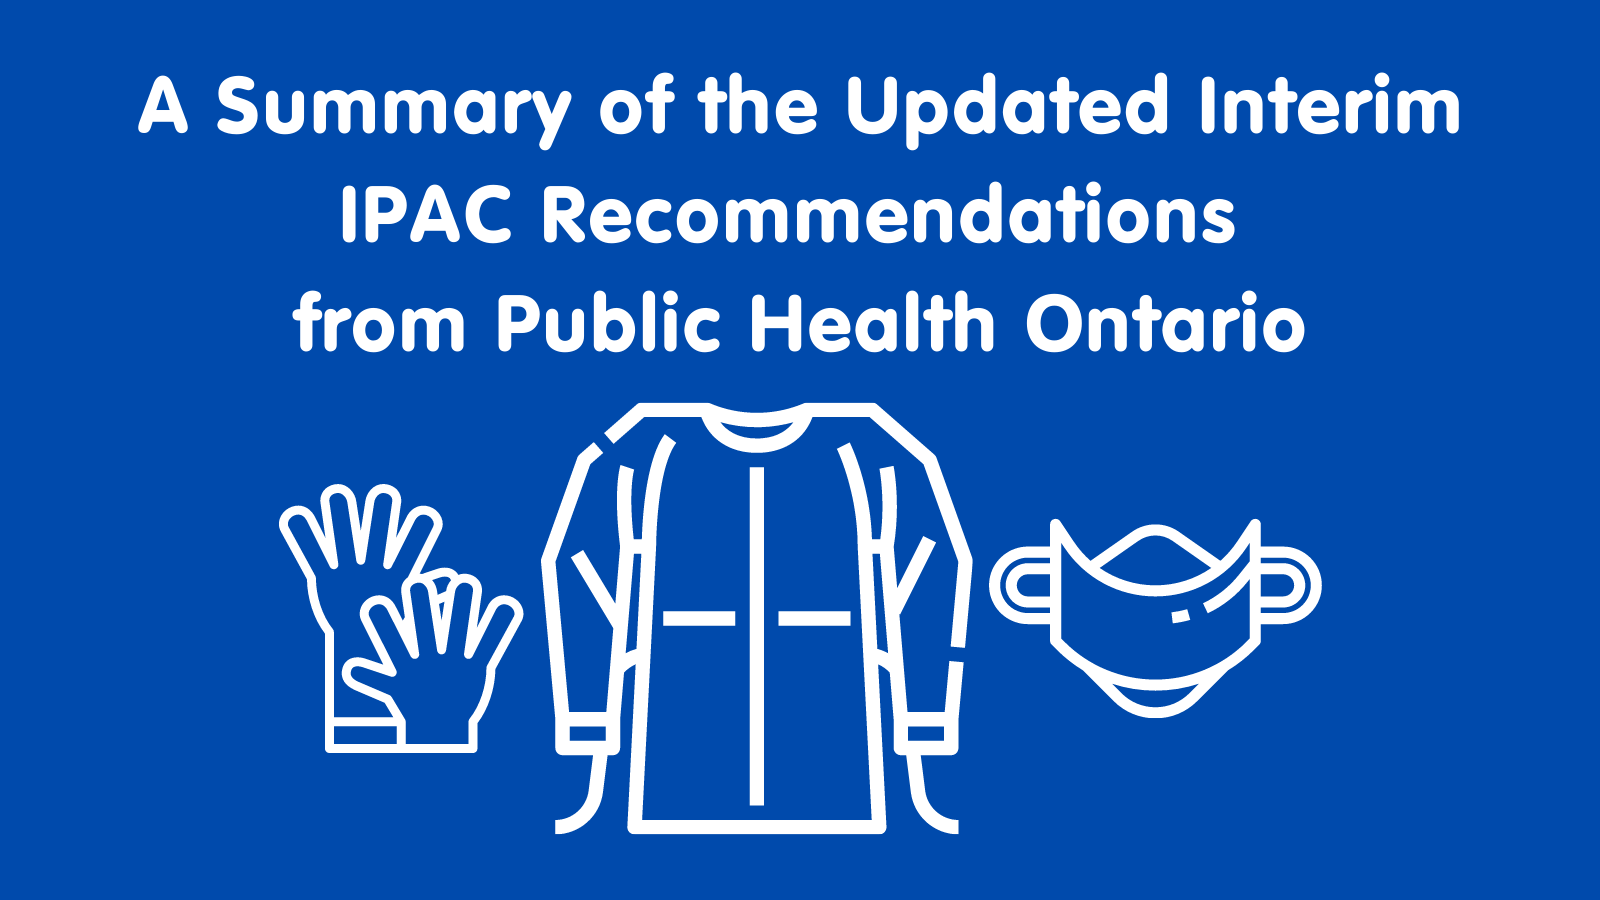  A Summary of Updated Interim IPAC Recommendations from Public Health Ontario